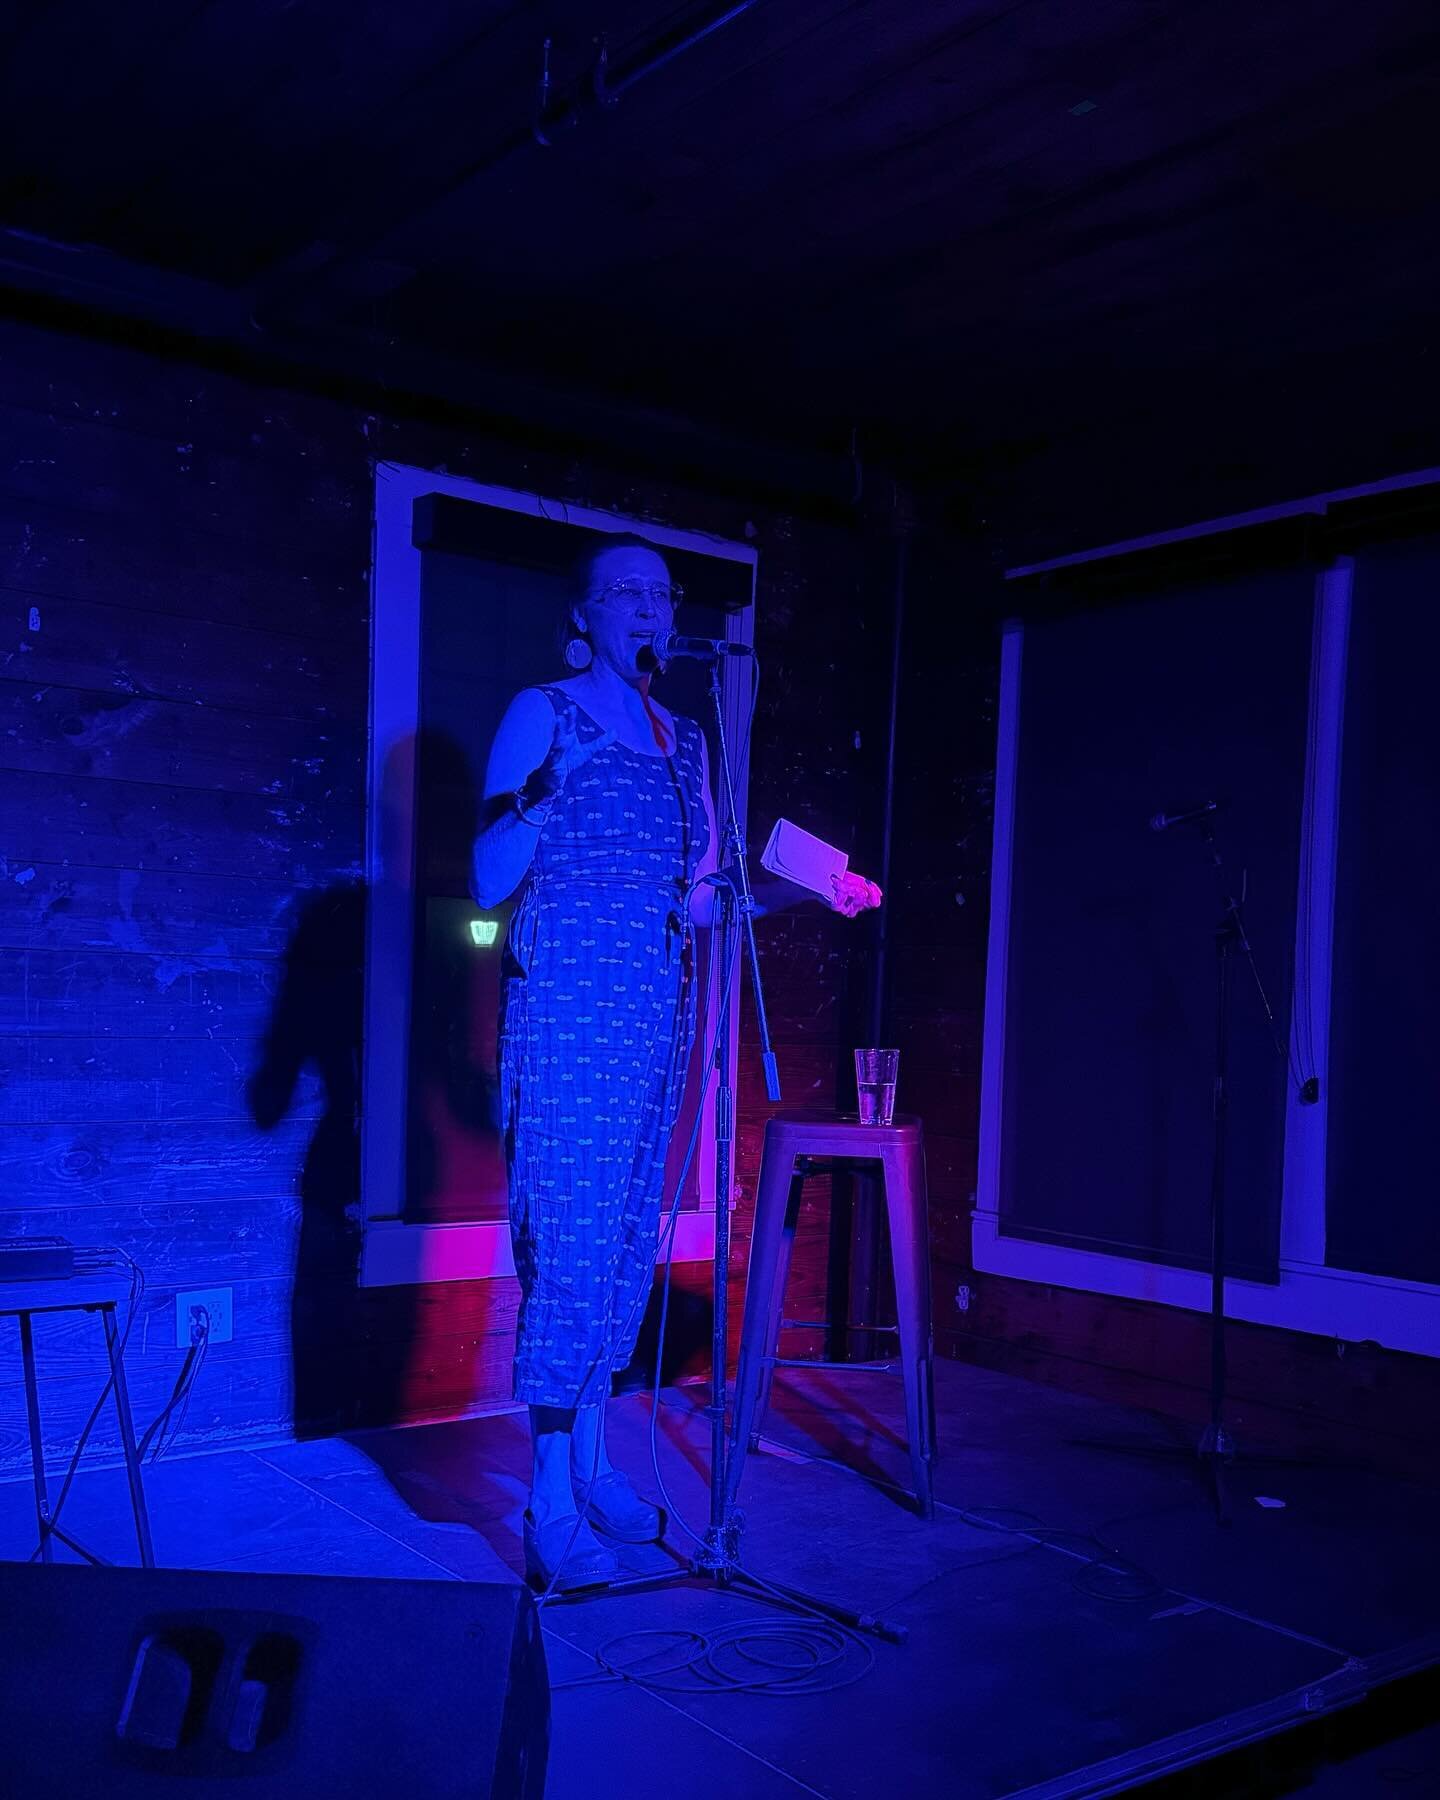 Thank you so much Josie Mitchell @willtherebe_snacks for kicking off our Axelrad reading series with @defunktmag. It was a pleasure having you and hearing the excerpt from your future book! 
A big thank you to everyone who came out and signed up for 